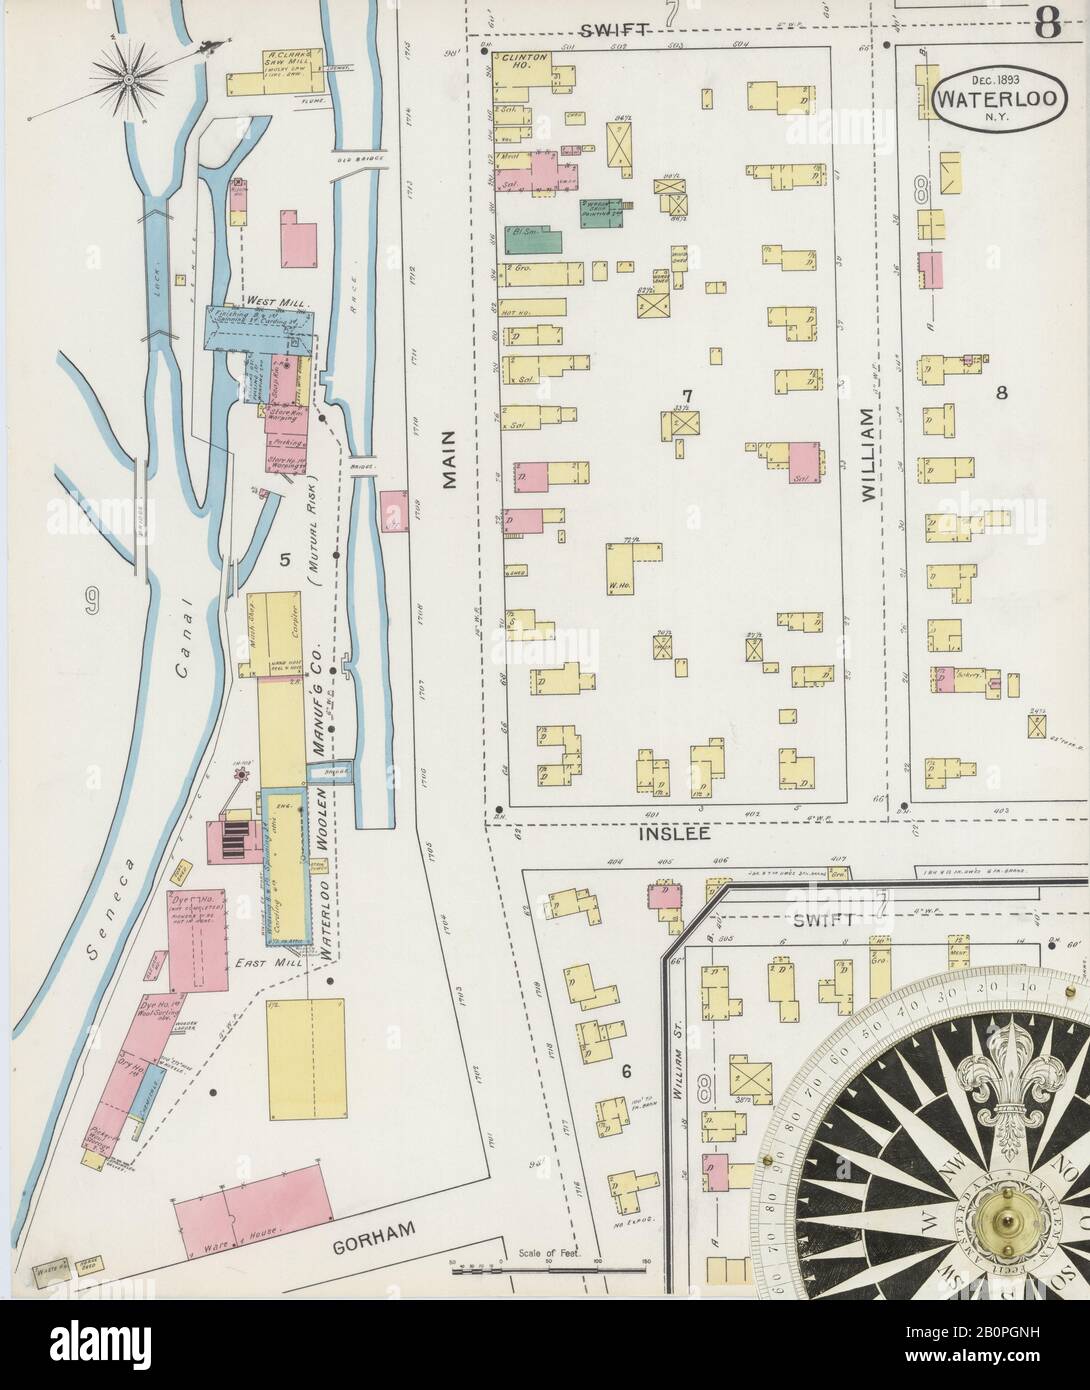 Image 8 of Sanborn Fire Insurance Map from Waterloo, Seneca County, New York. Dec 1893. 11 Sheet(s), America, street map with a Nineteenth Century compass Stock Photo